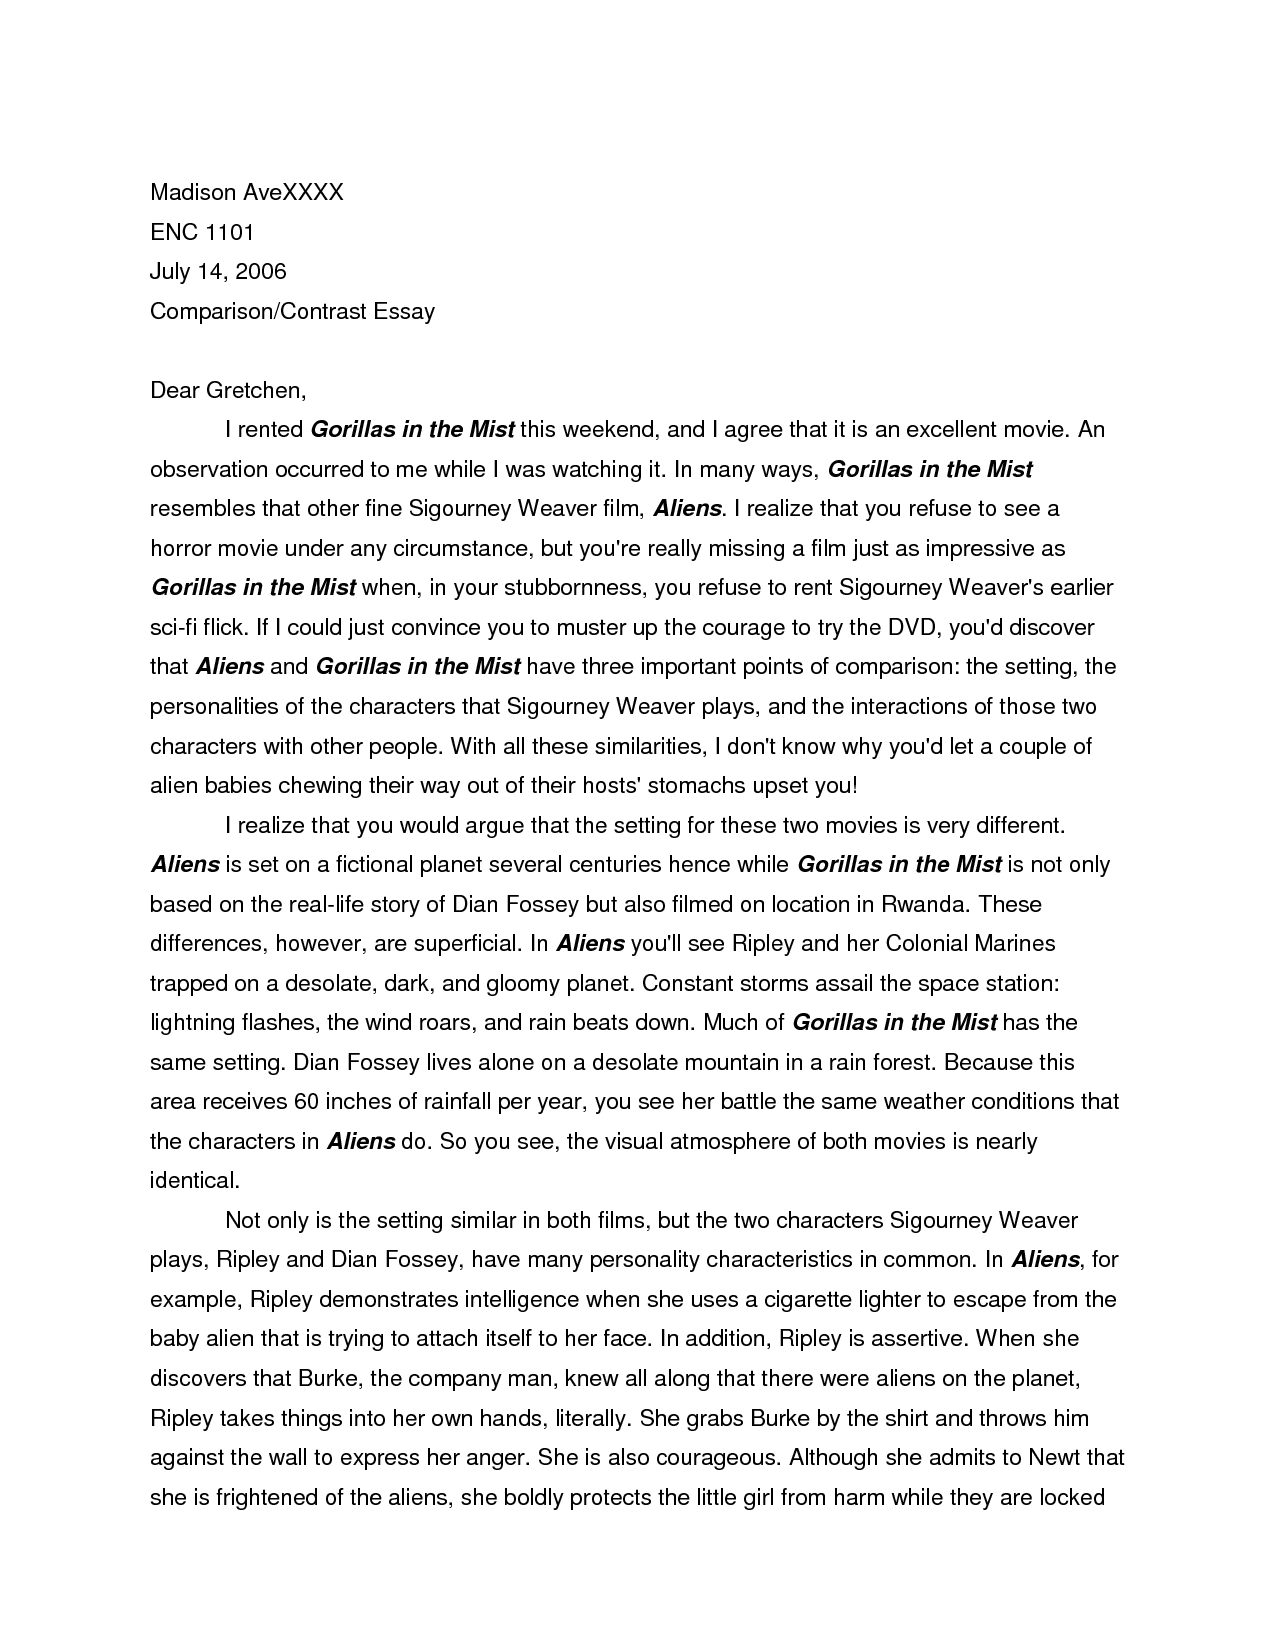 How to start a compare and contrast essay